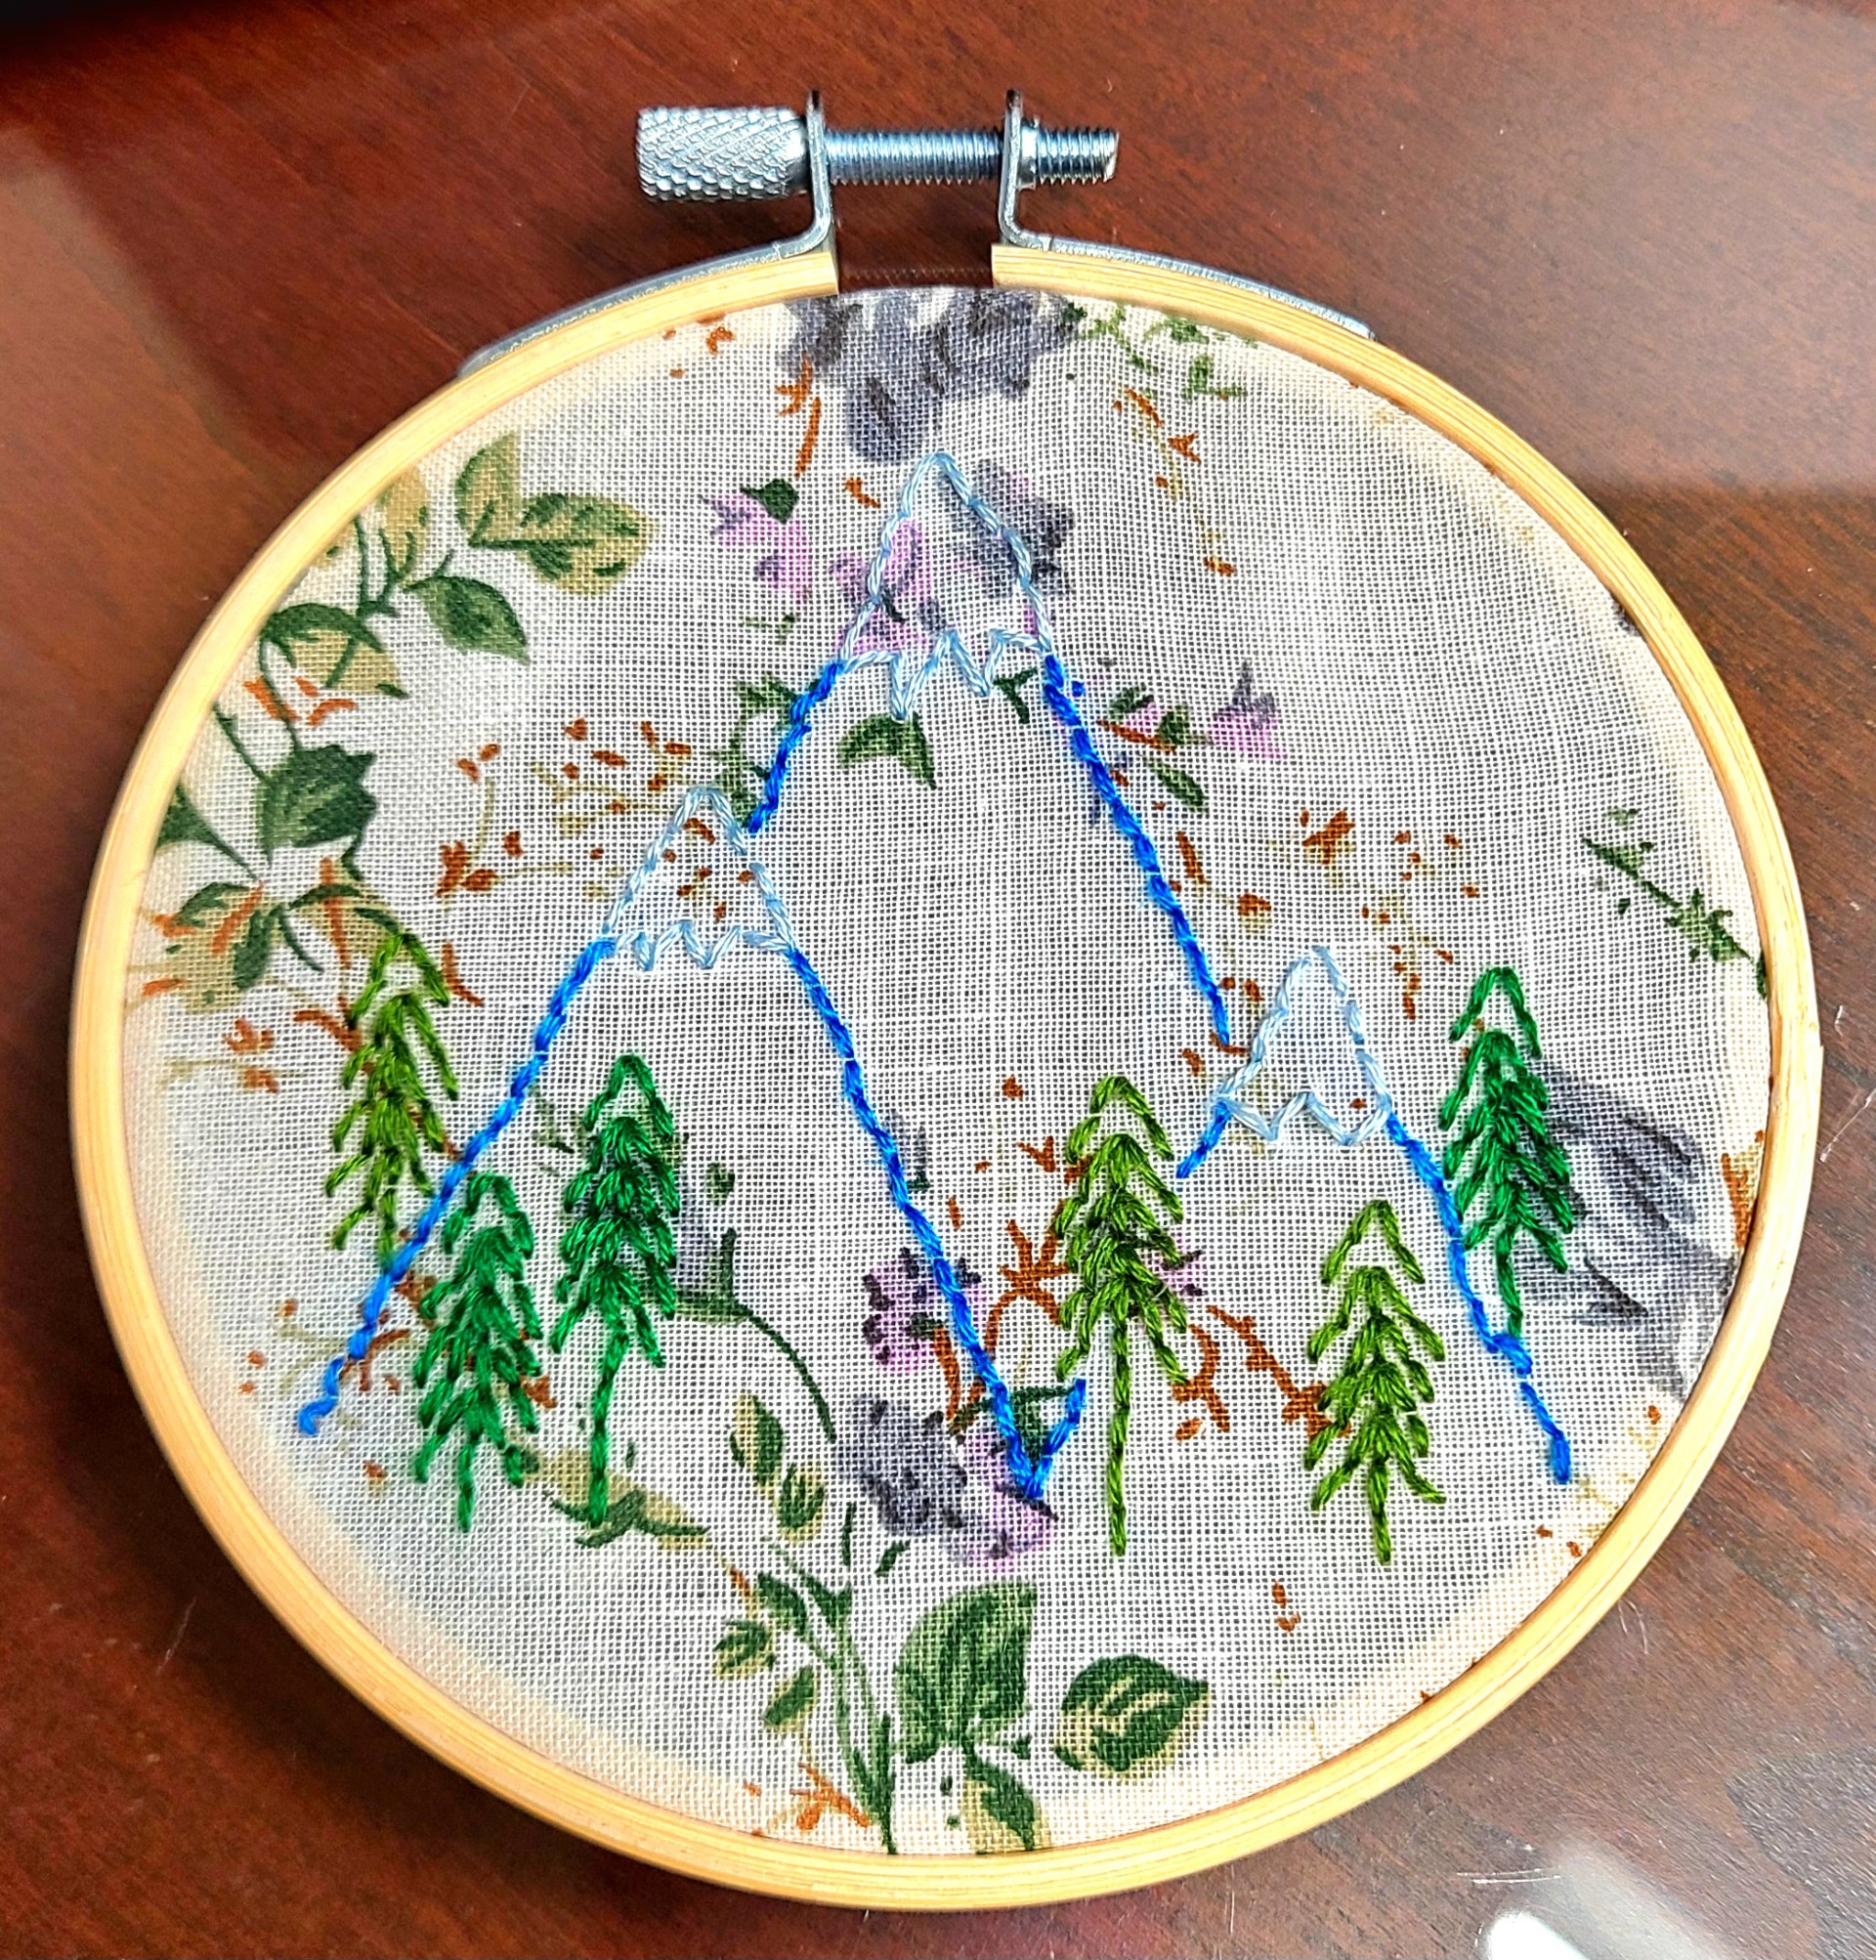 Embroidery hoop with three mountains and some trees in the center